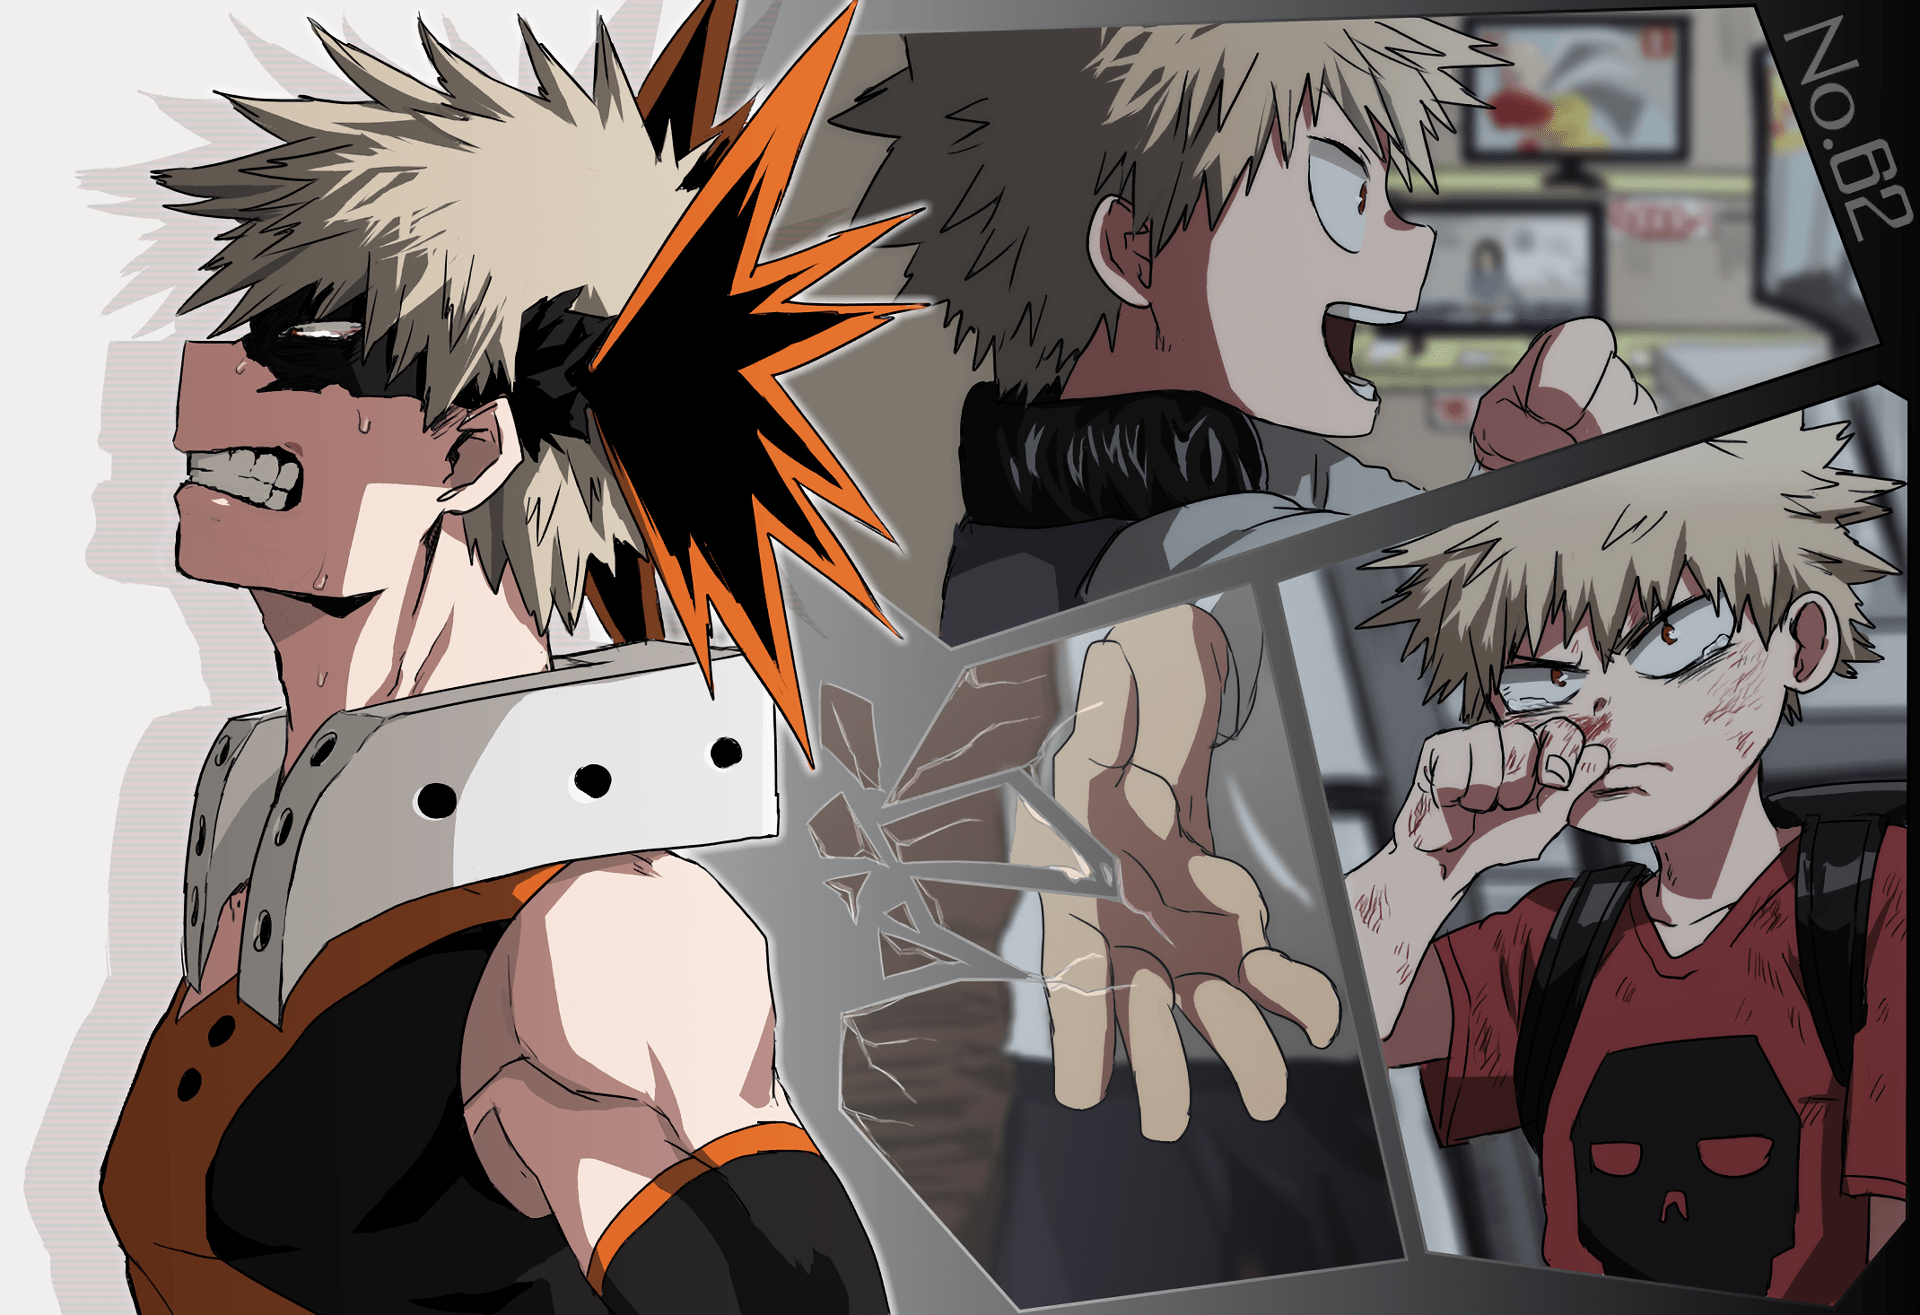 Katsuki Bakugo, the no. 1 hero, has a strong sense of justice and a desire for recognition. He is a hero who is always looking for new challenges and is not afraid to take risks to achieve his goals. - Bakugo